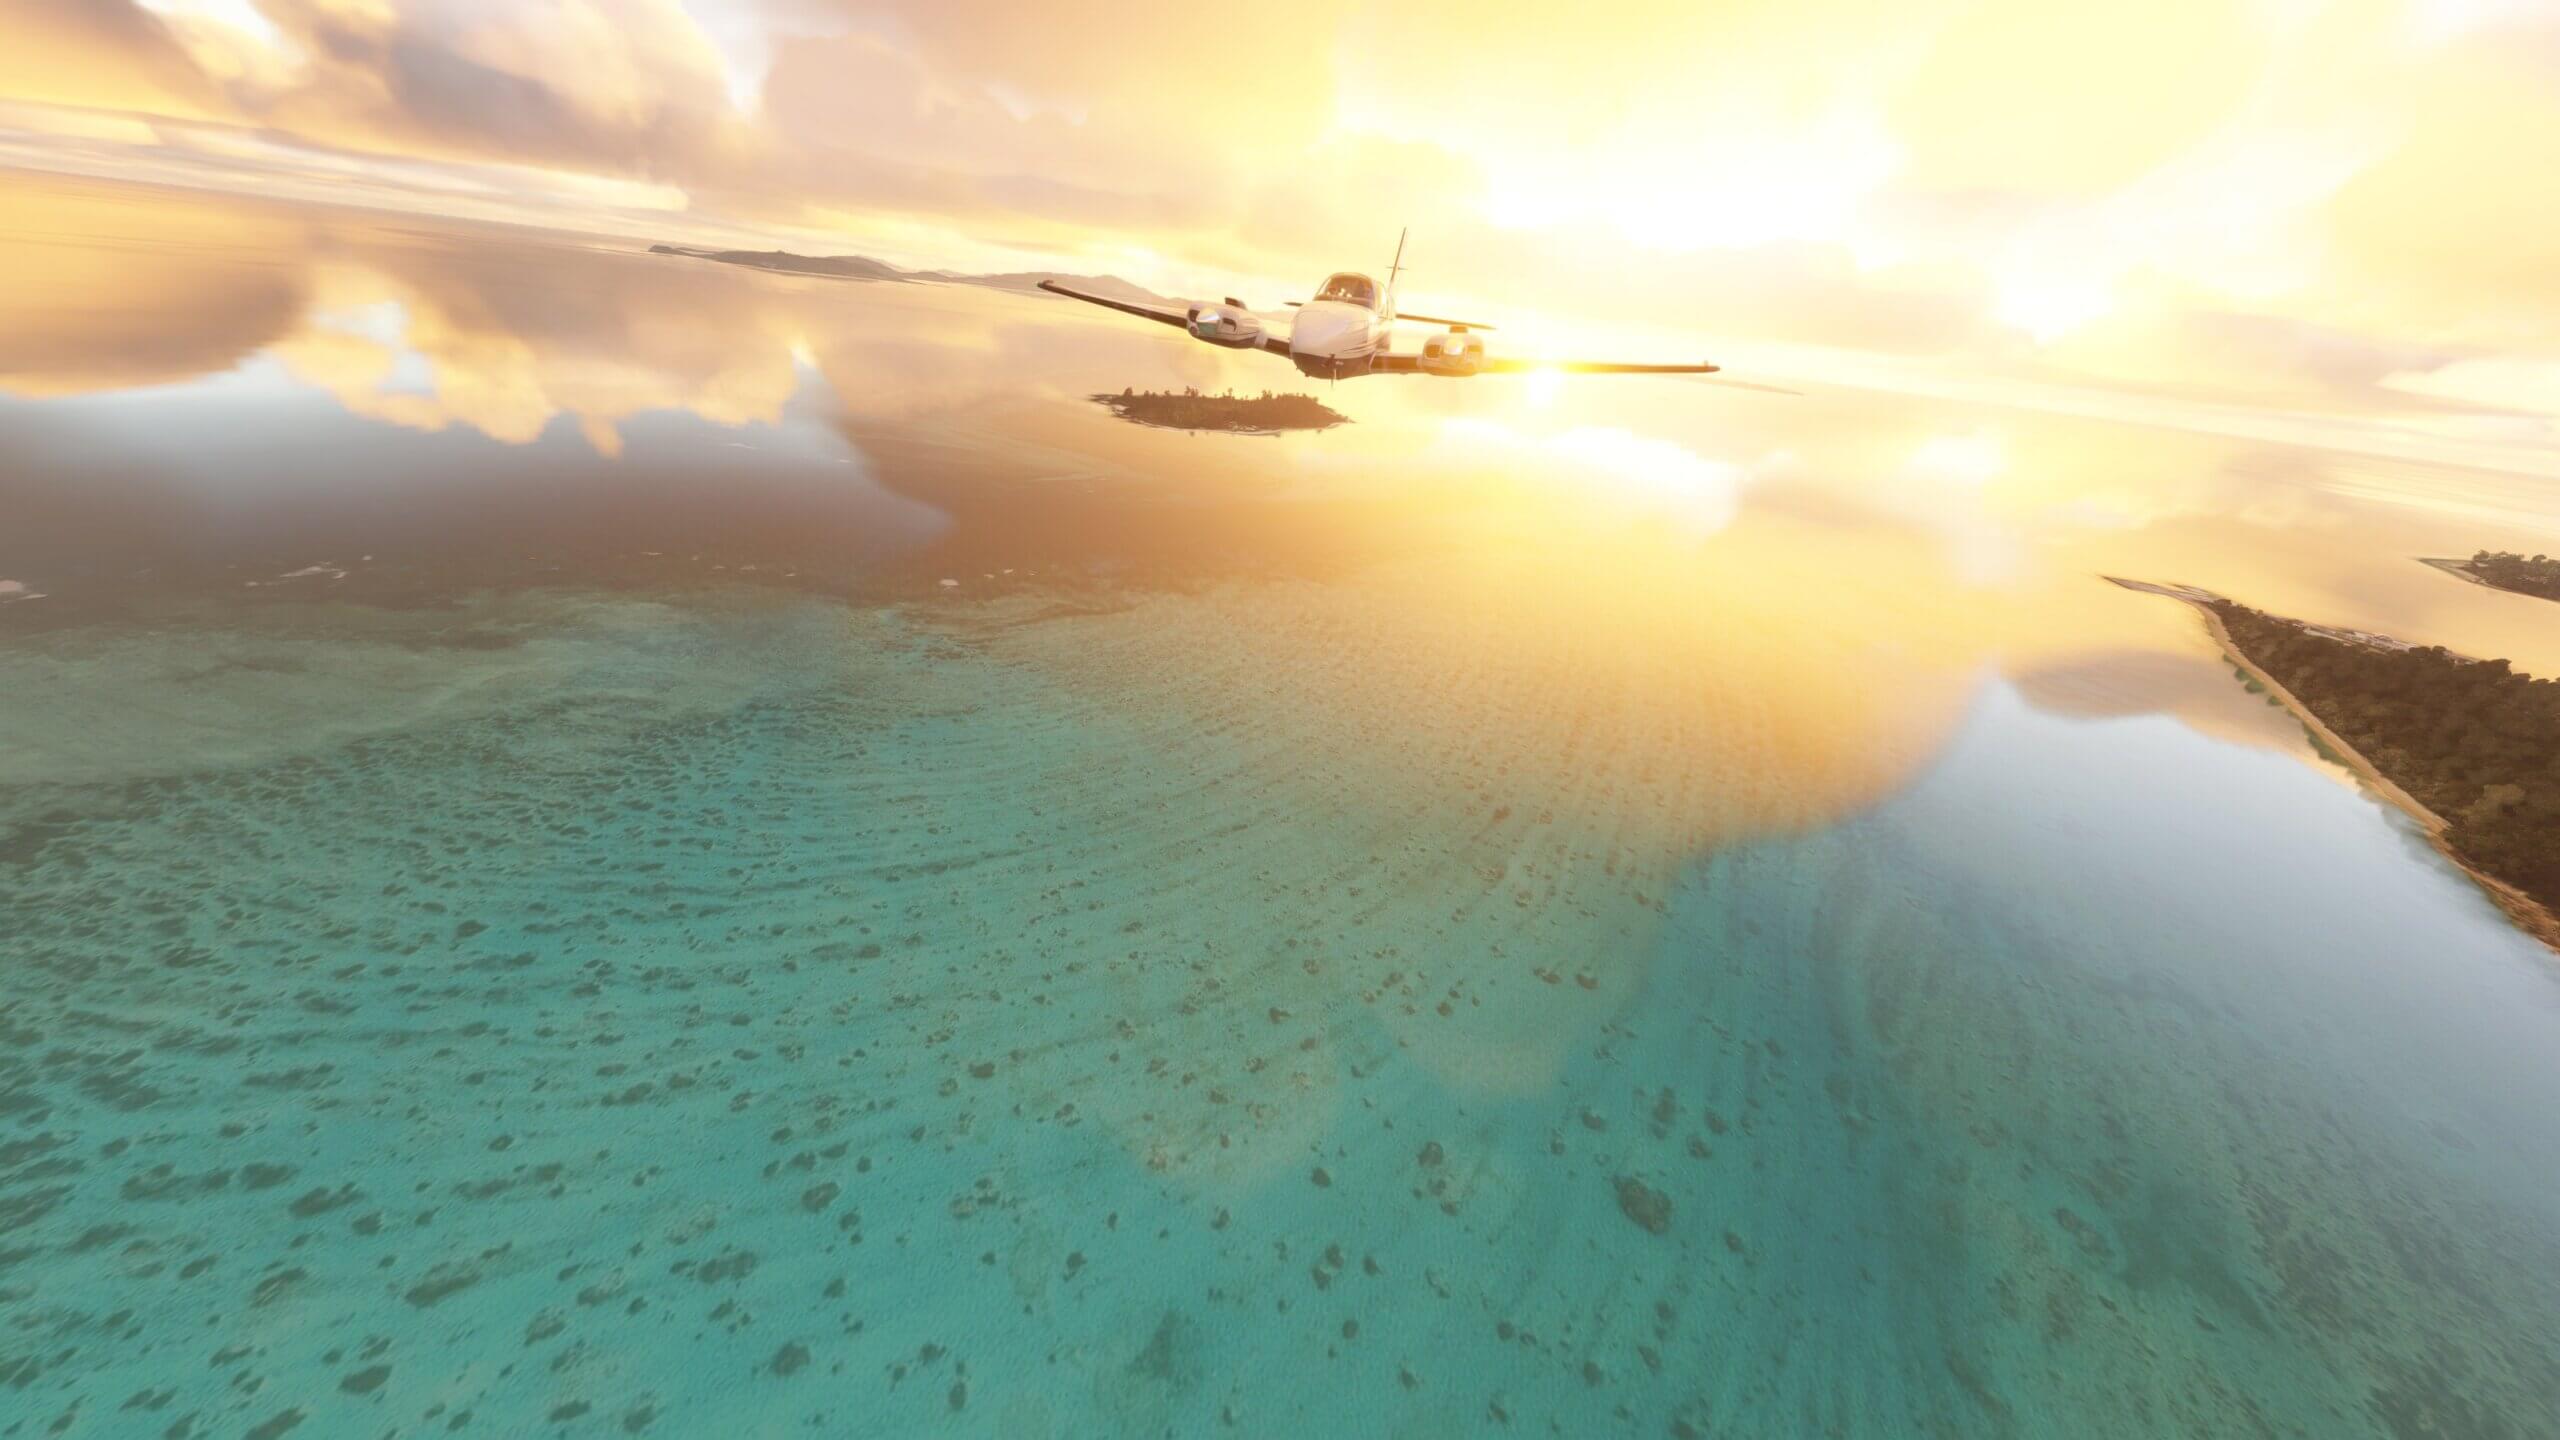 A plane flies towards the camera over a cyan ocean, lit at its back by the rising sun.